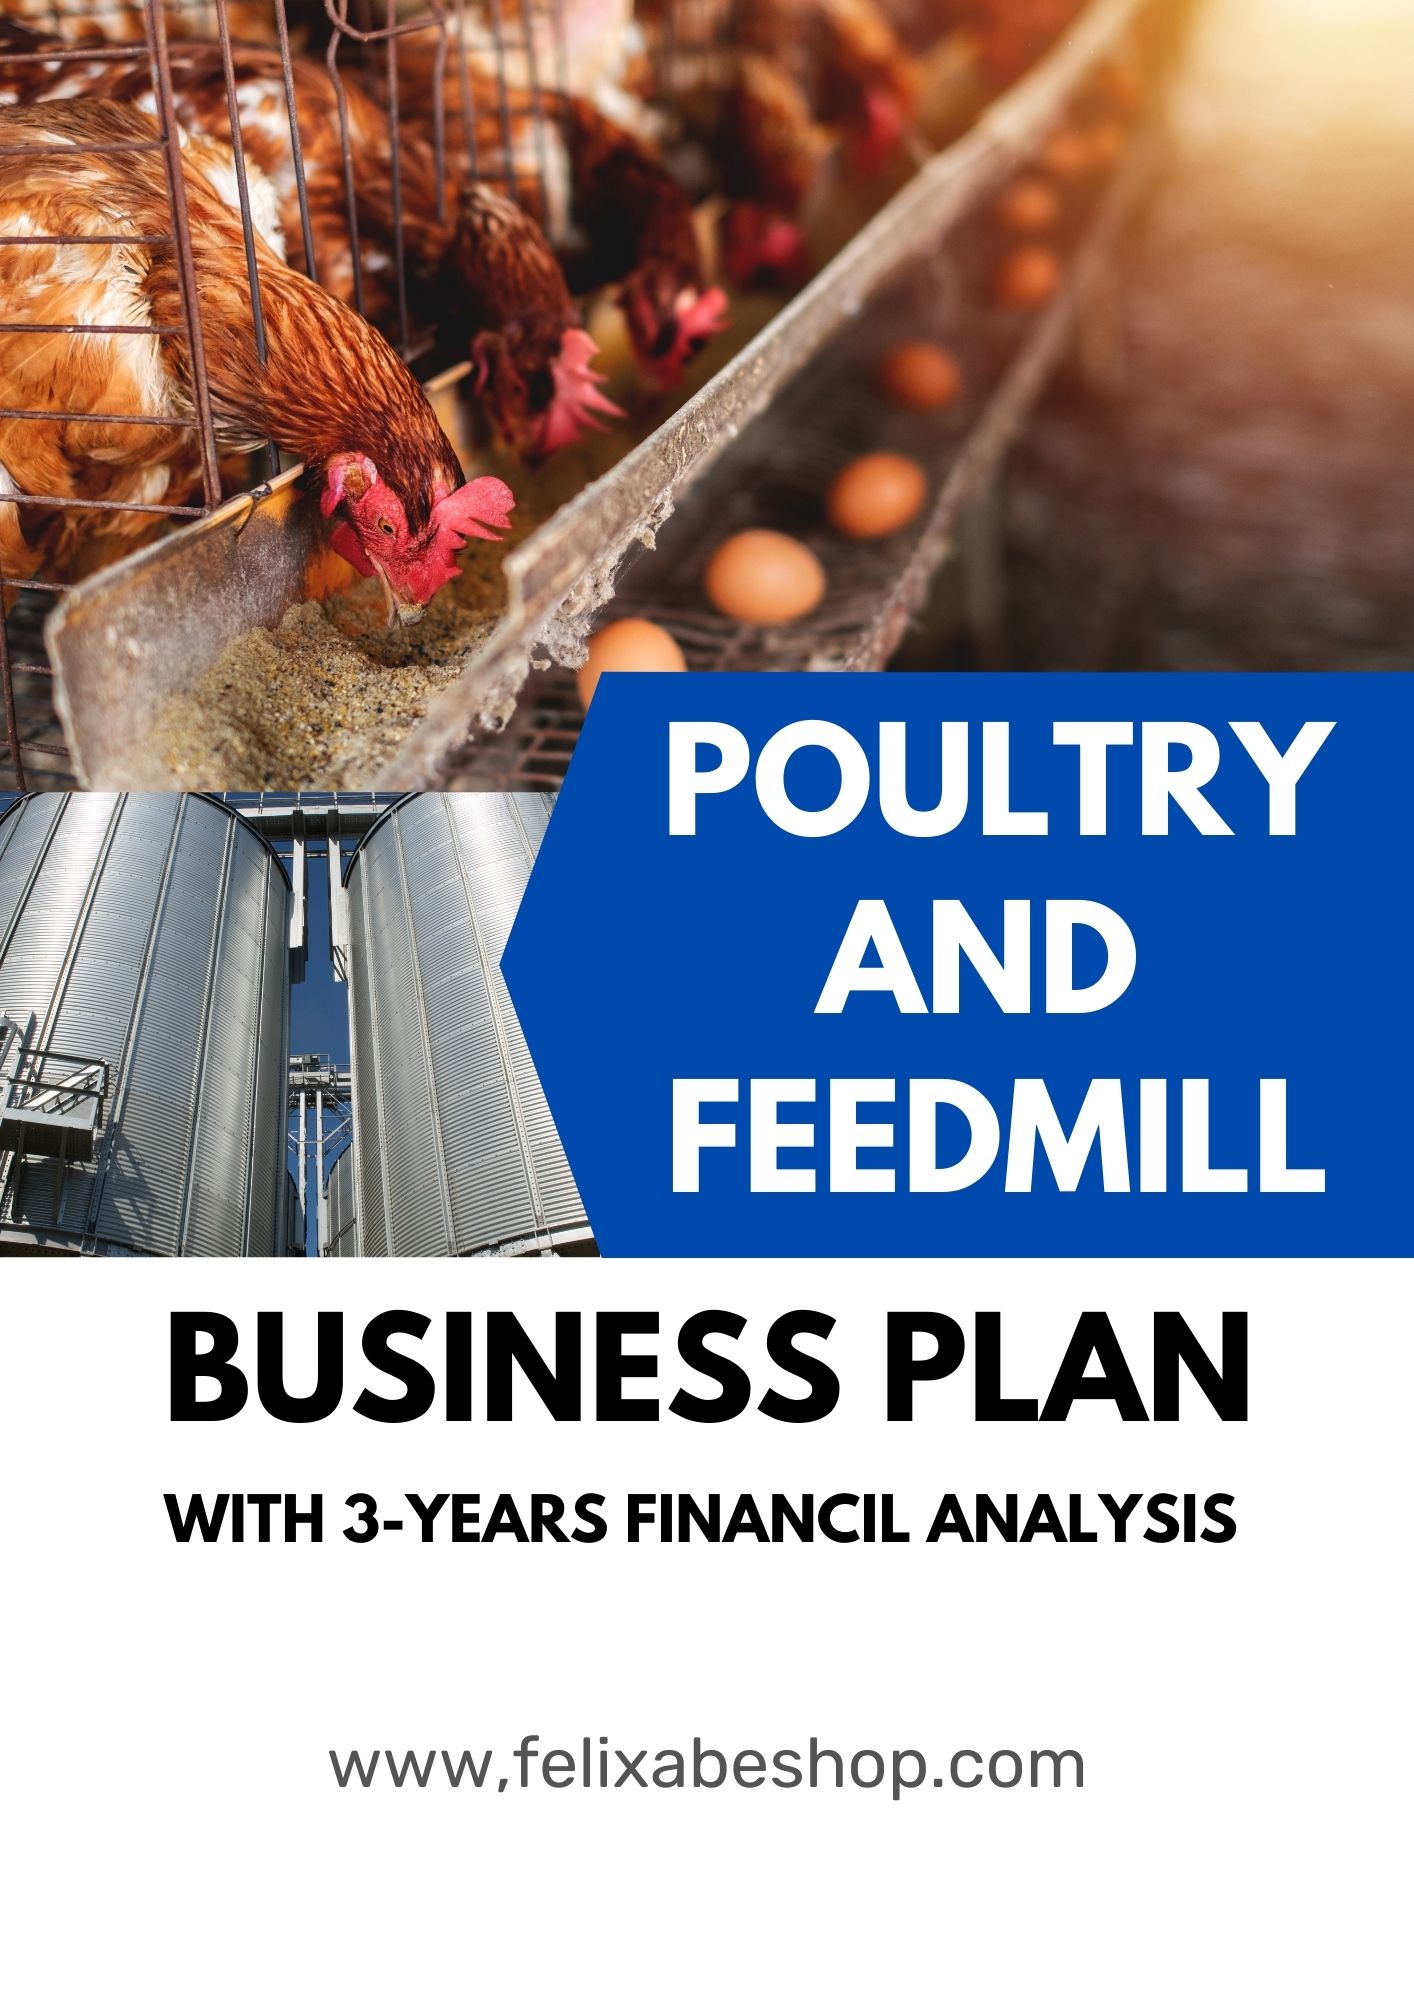 business plan about poultry